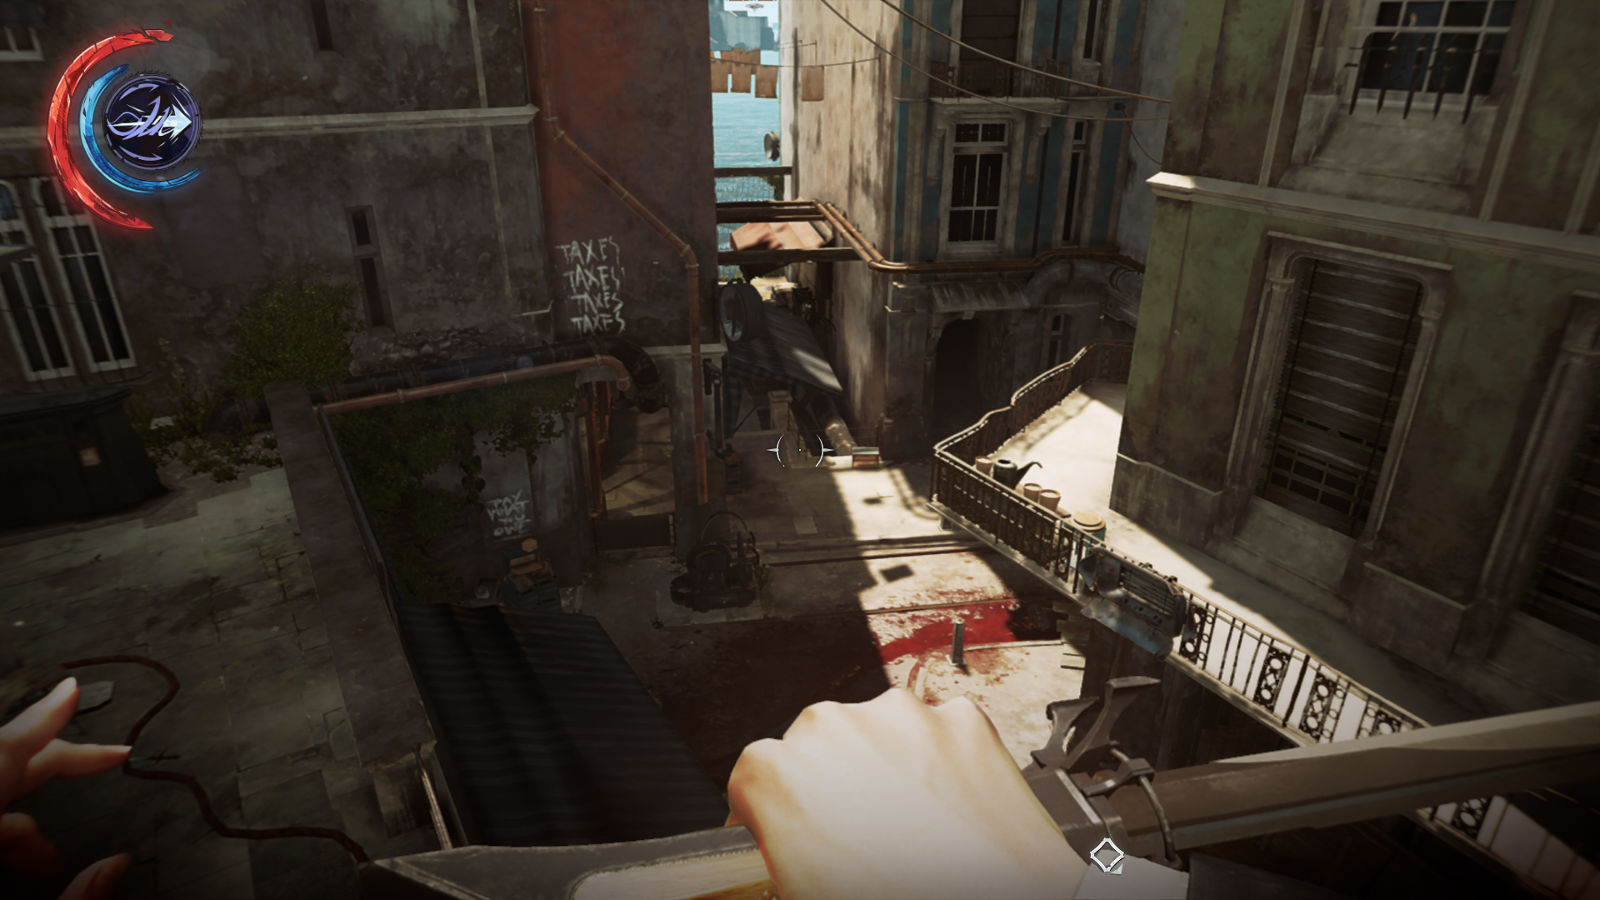 Dishonored 2 to receive a New Game Plus mode in December